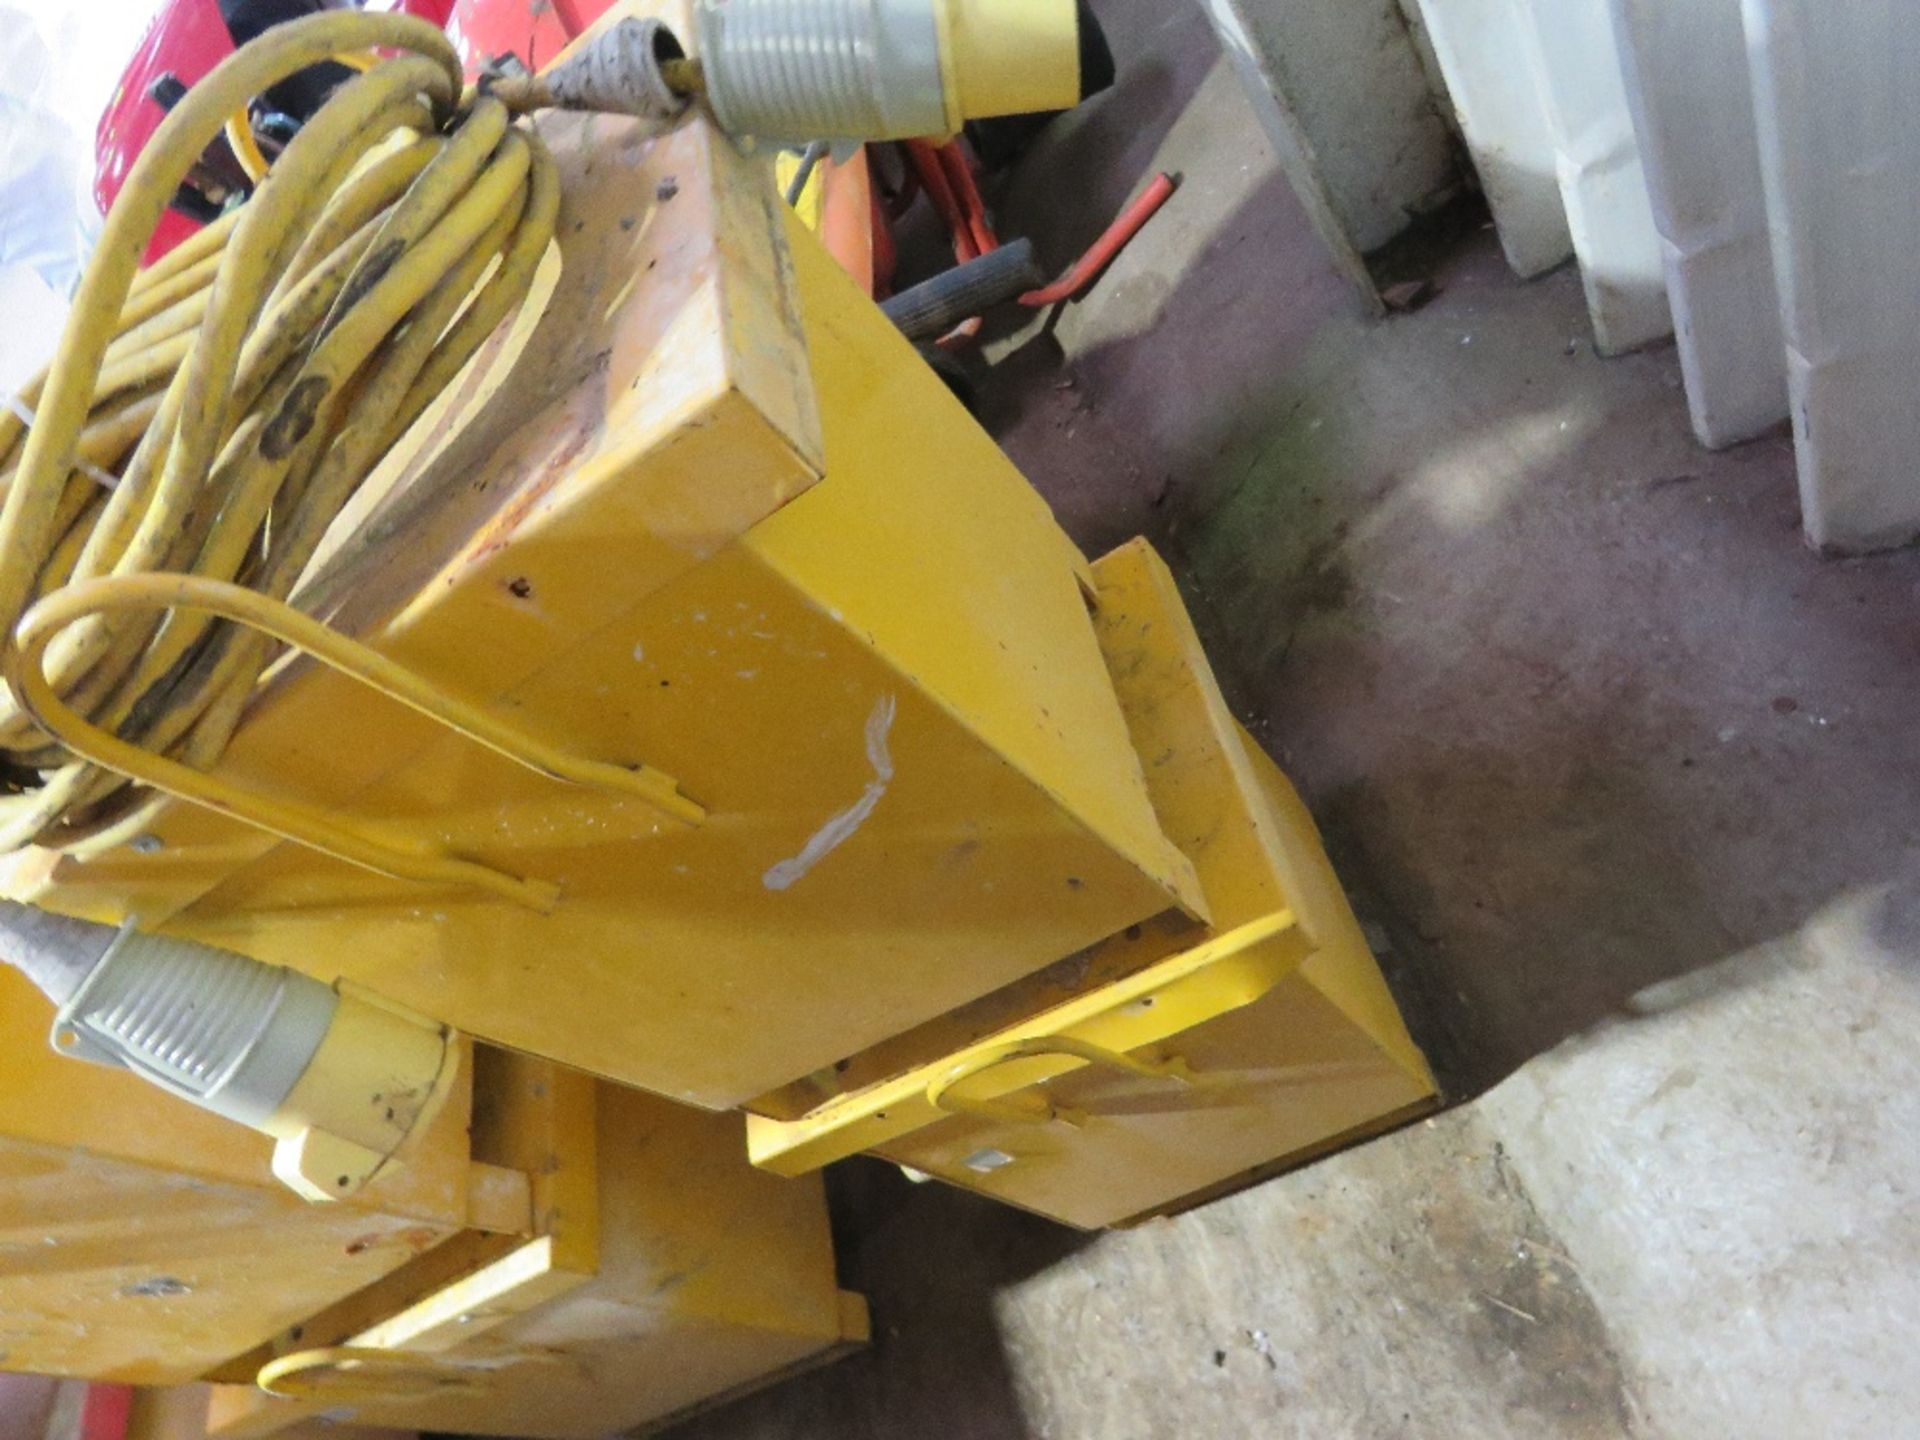 2 X LARGE SIZED SITE TRANSFORMERS, YELLOW PLUS AN EXTENSION LEAD. - Image 4 of 4